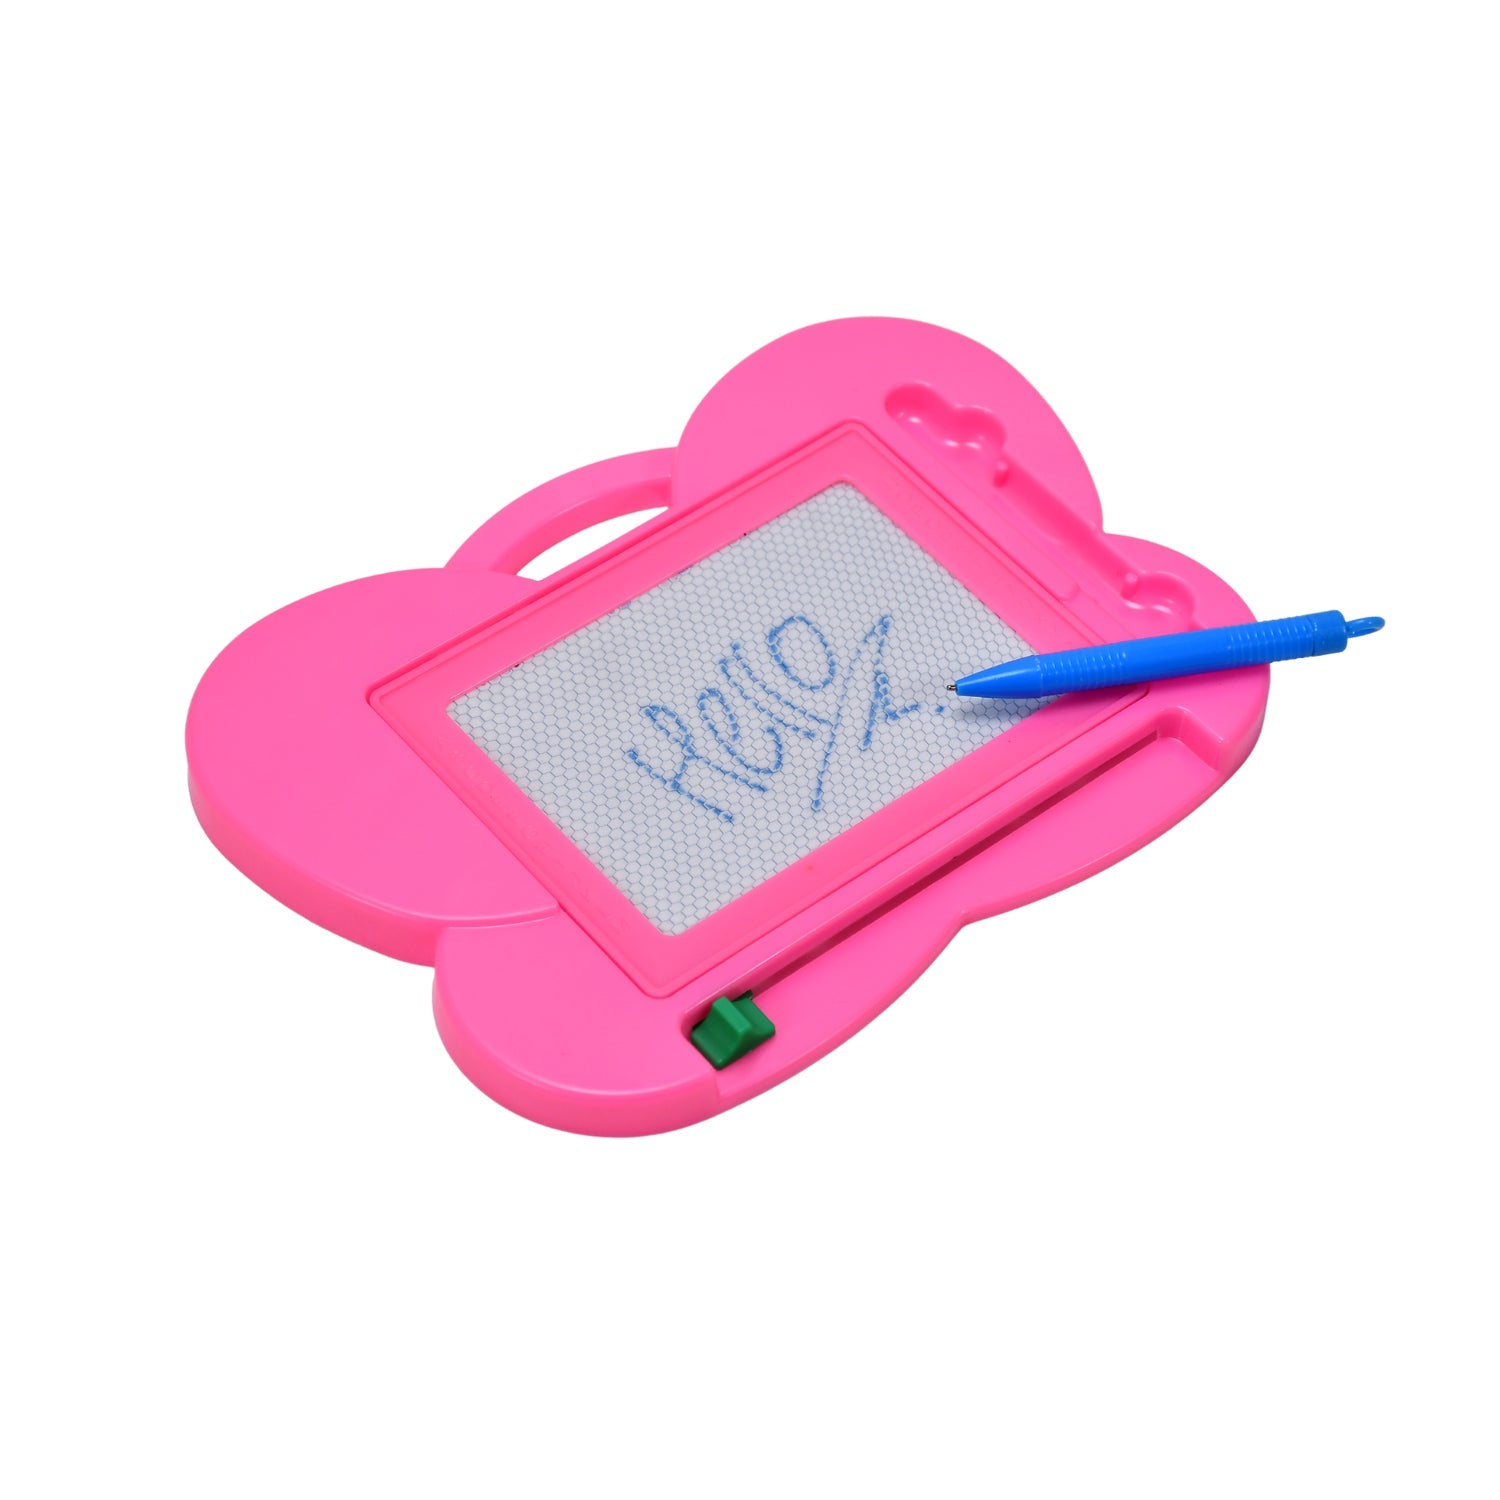 Magic Magnetic Drawing & Writing Slate Toy